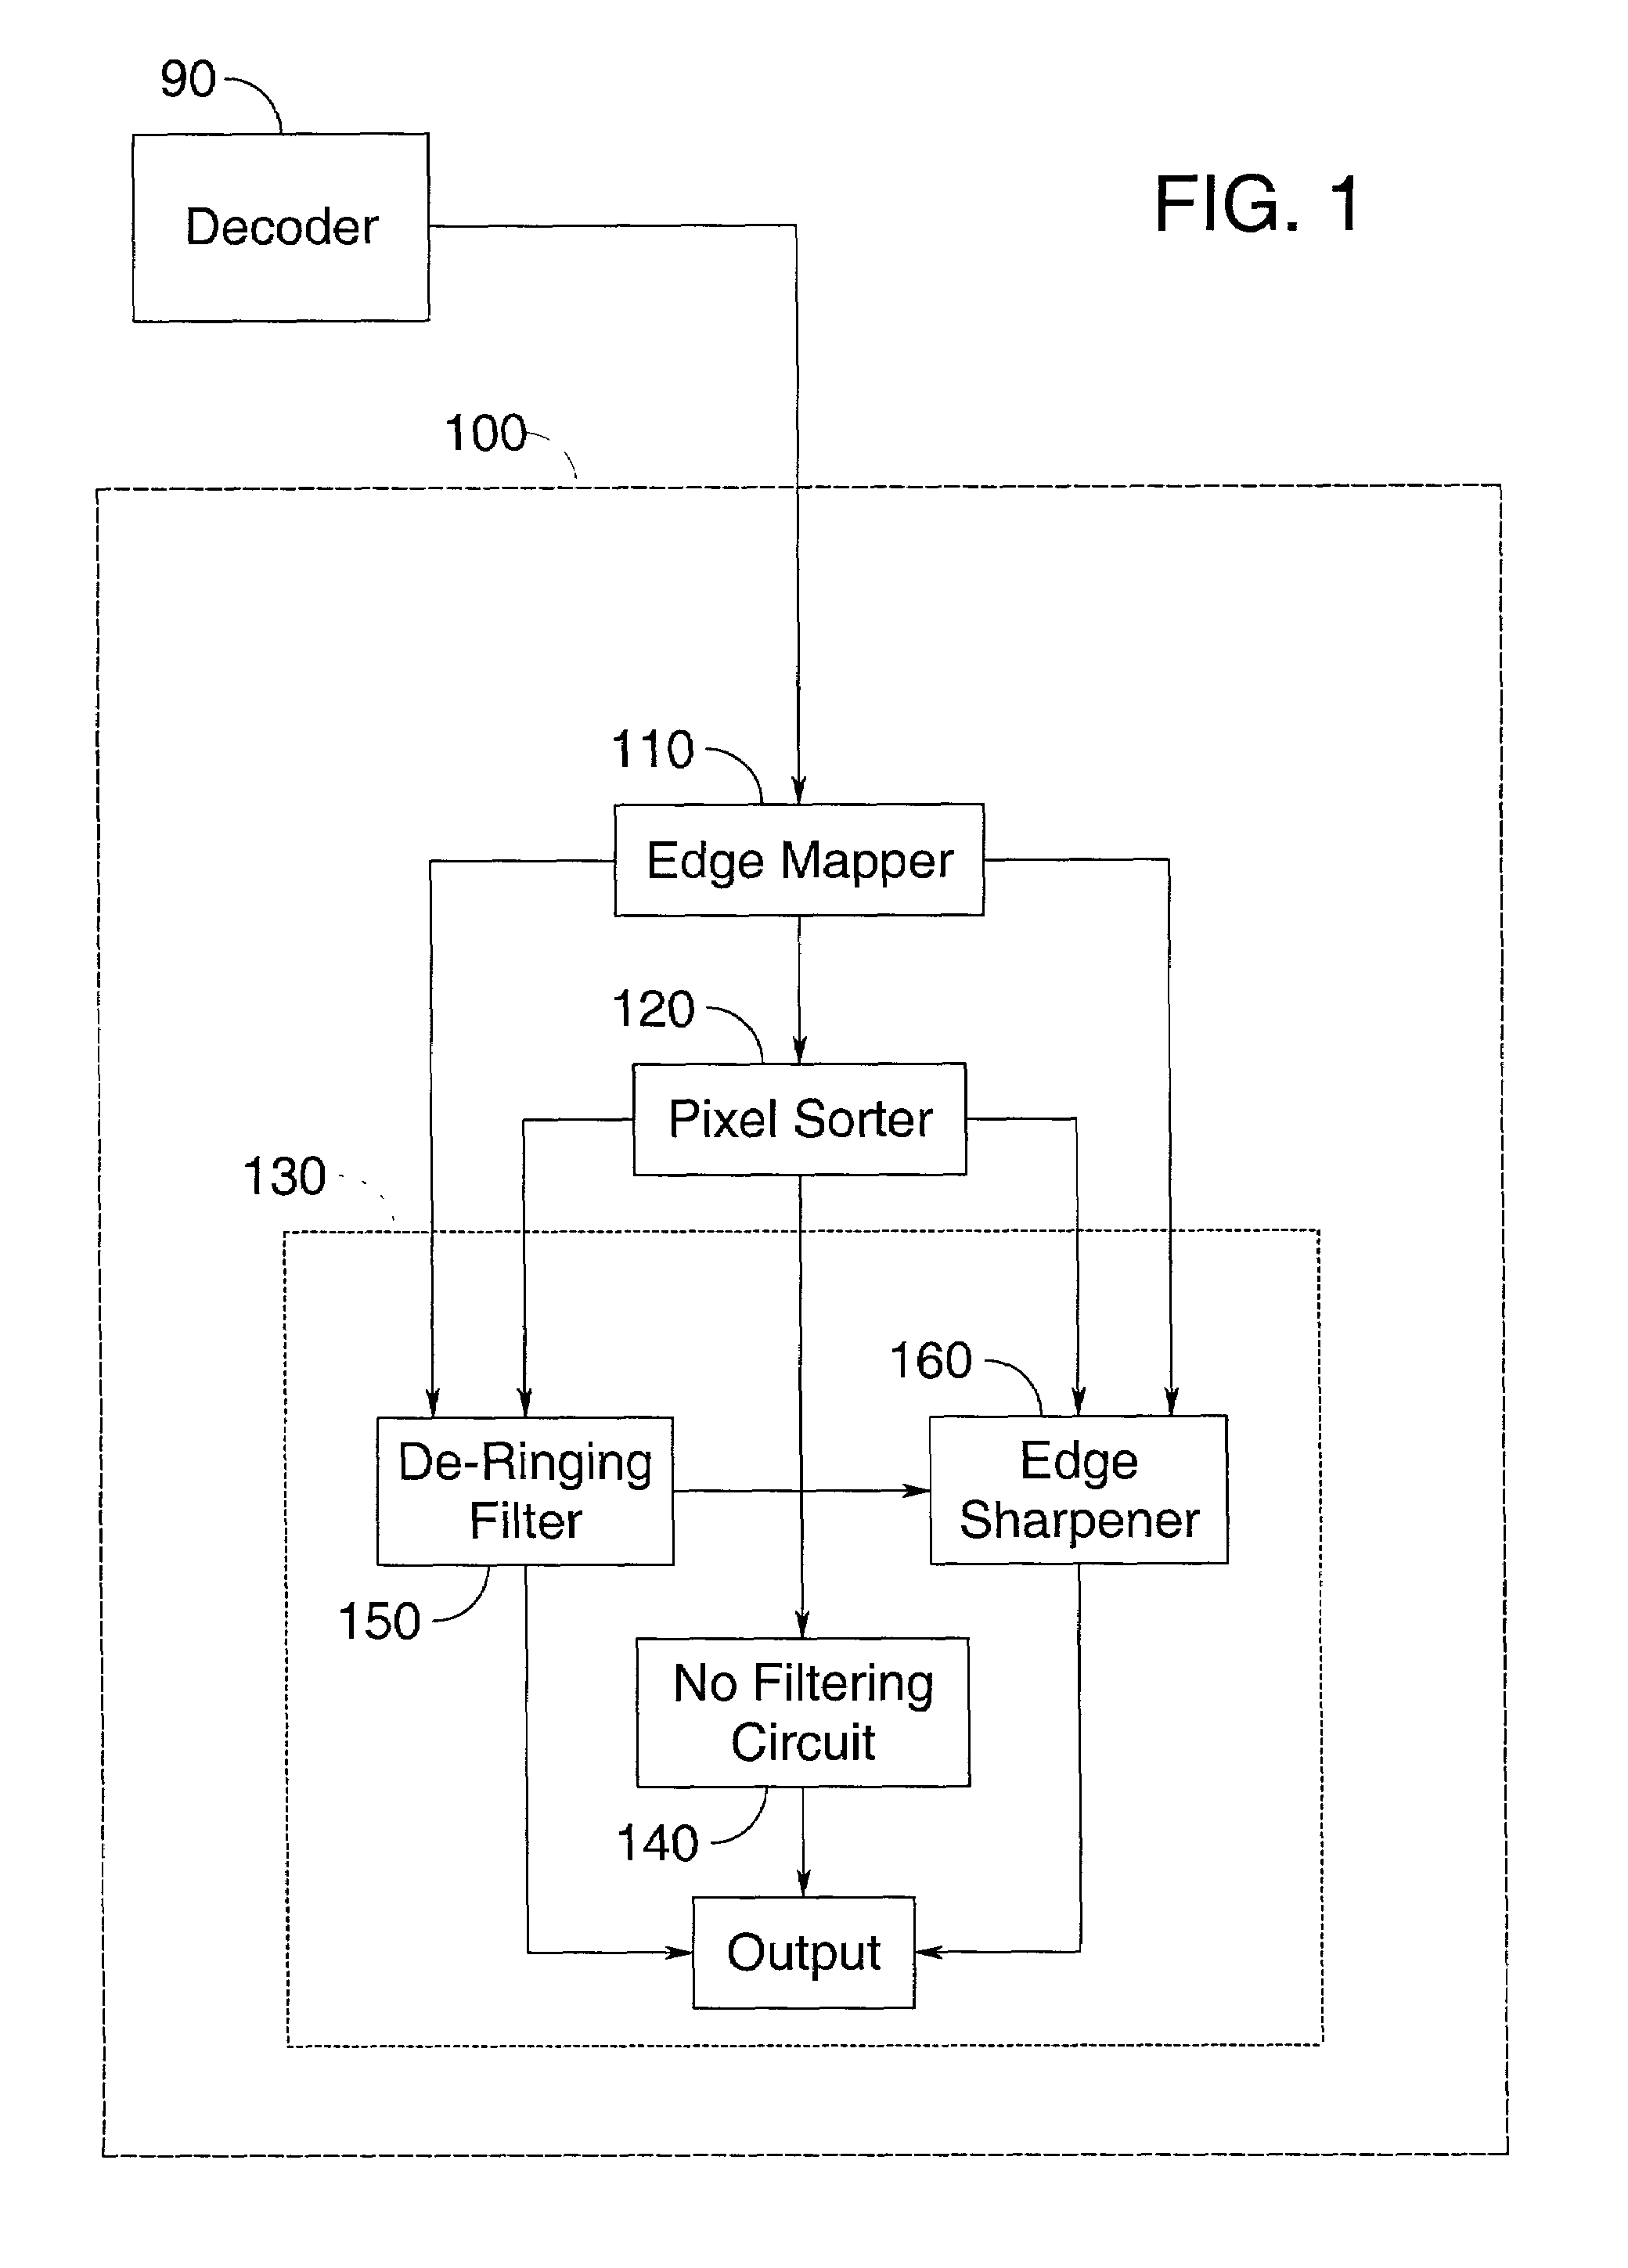 Filter for combined de-ringing and edge sharpening